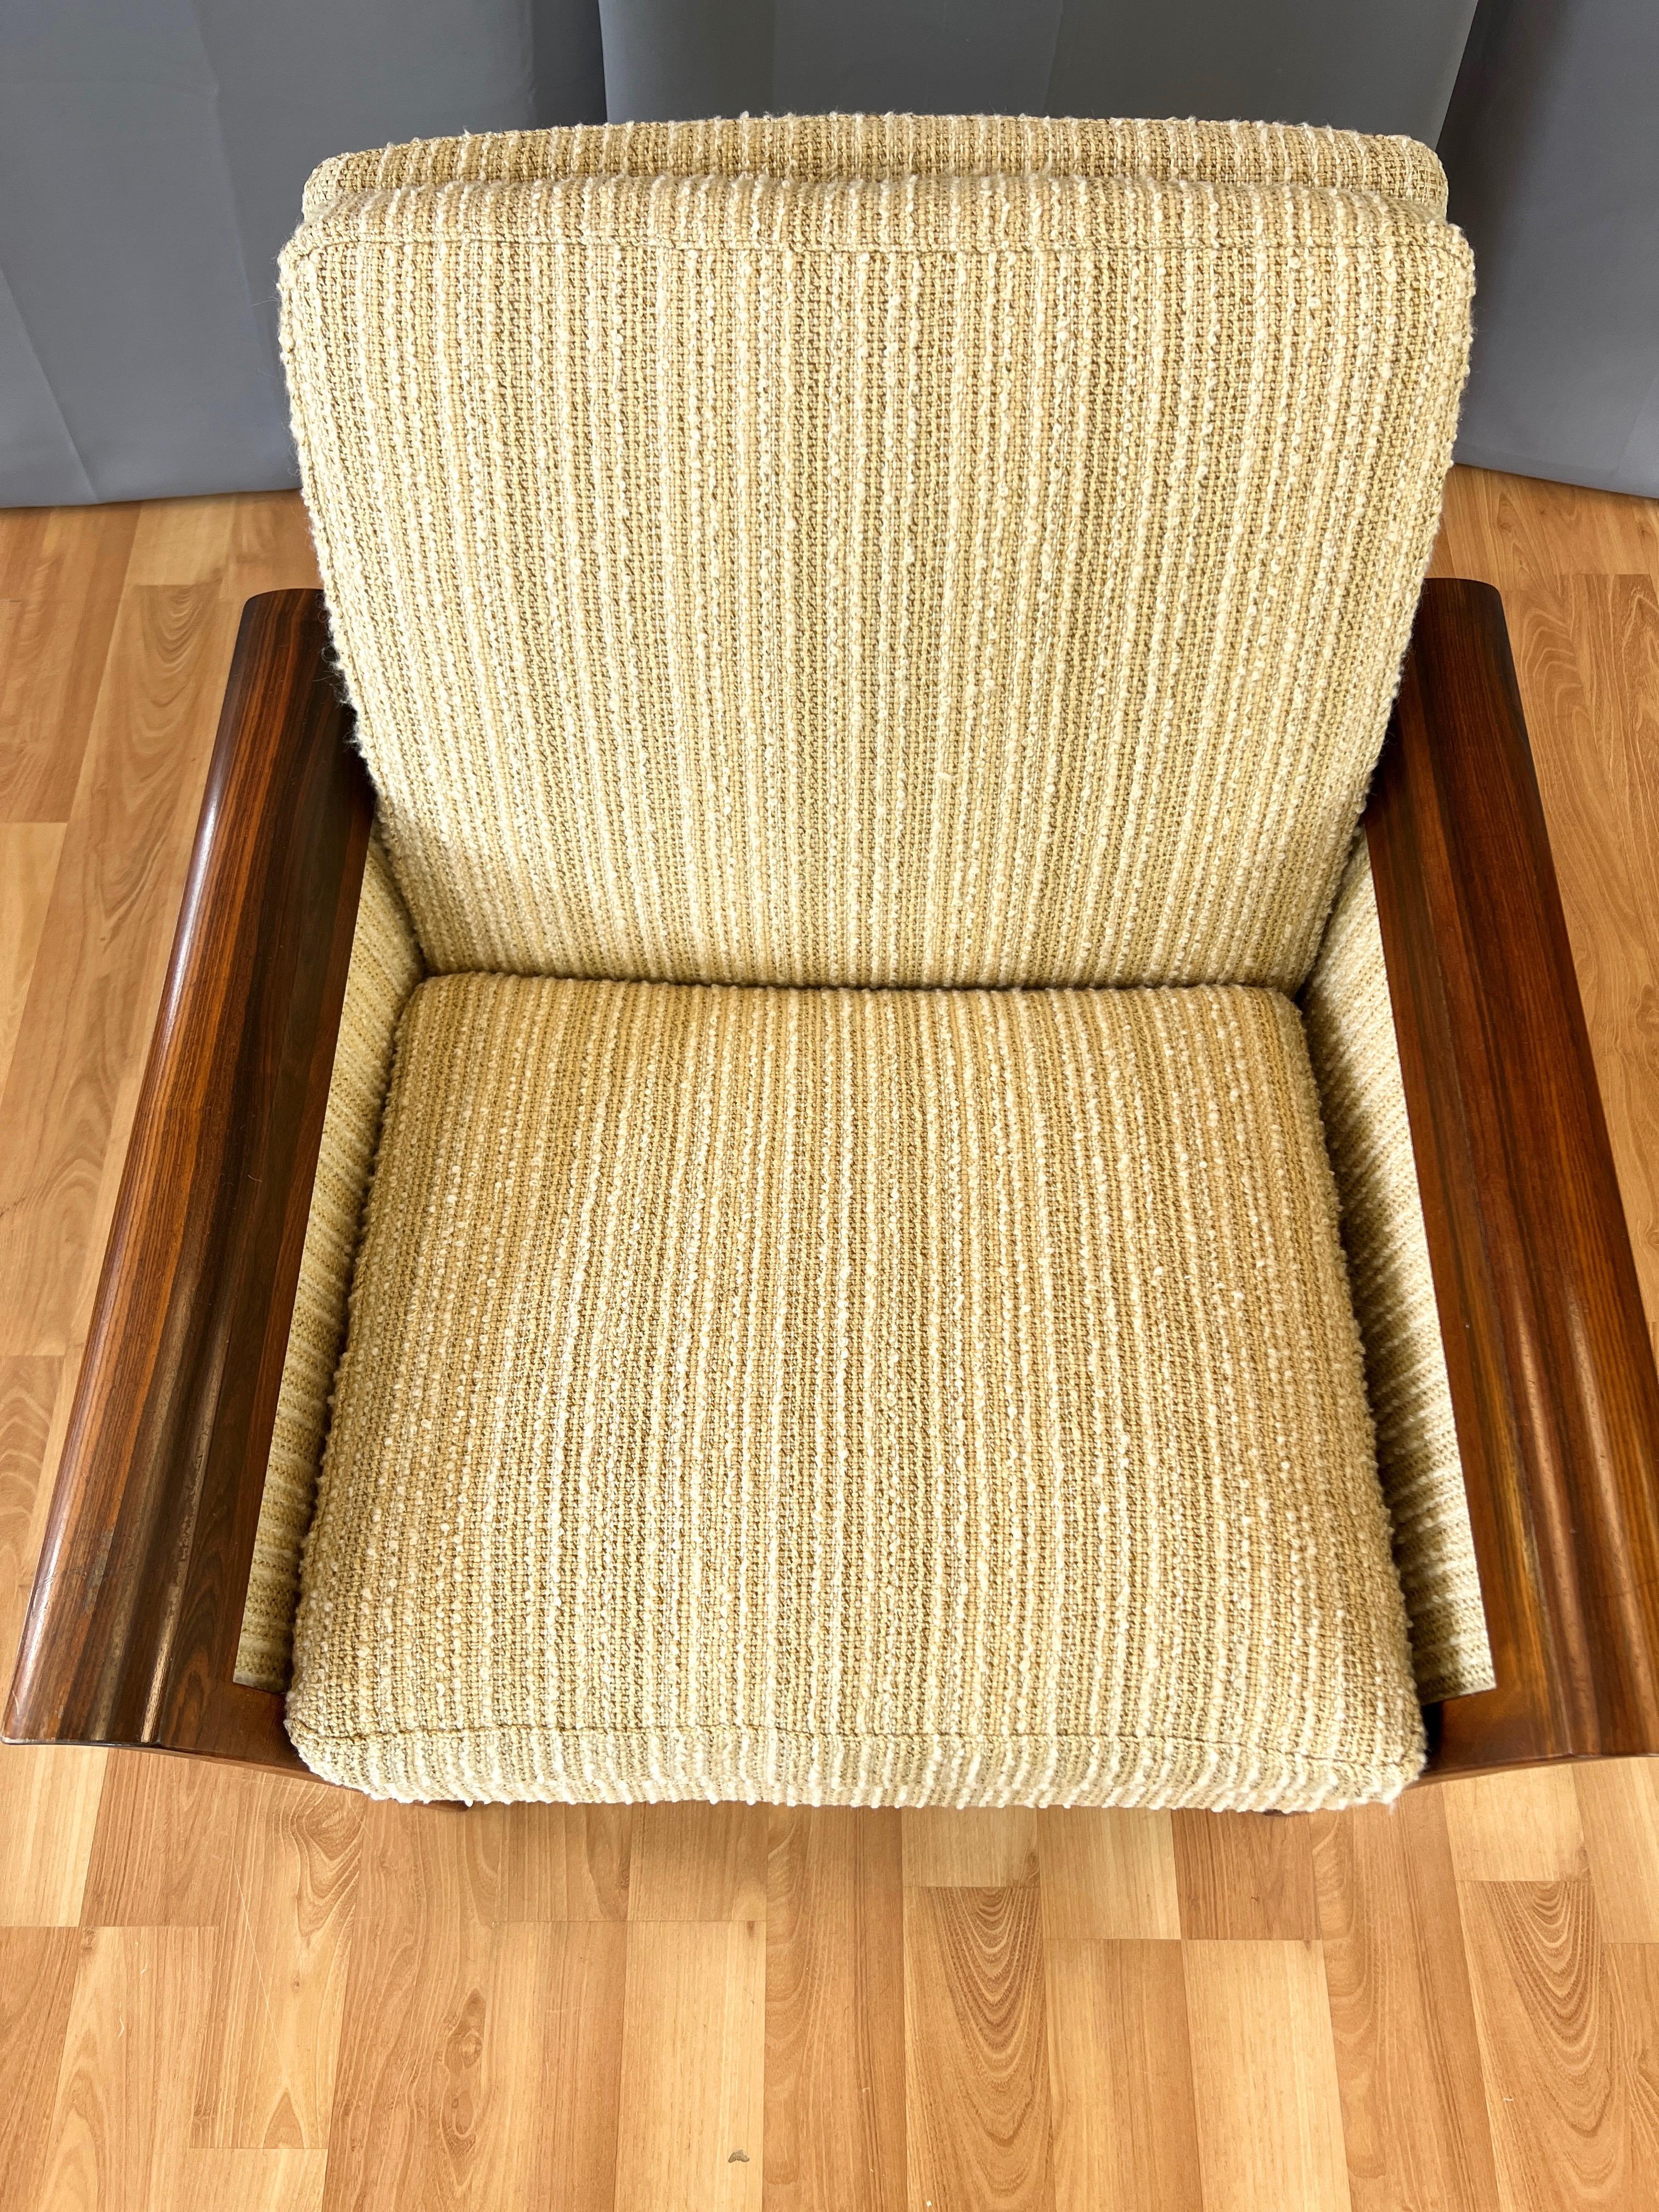 Knut Sæter for Vatne Møbler Rosewood and Upholstery Lounge Chair, 1976 For Sale 6